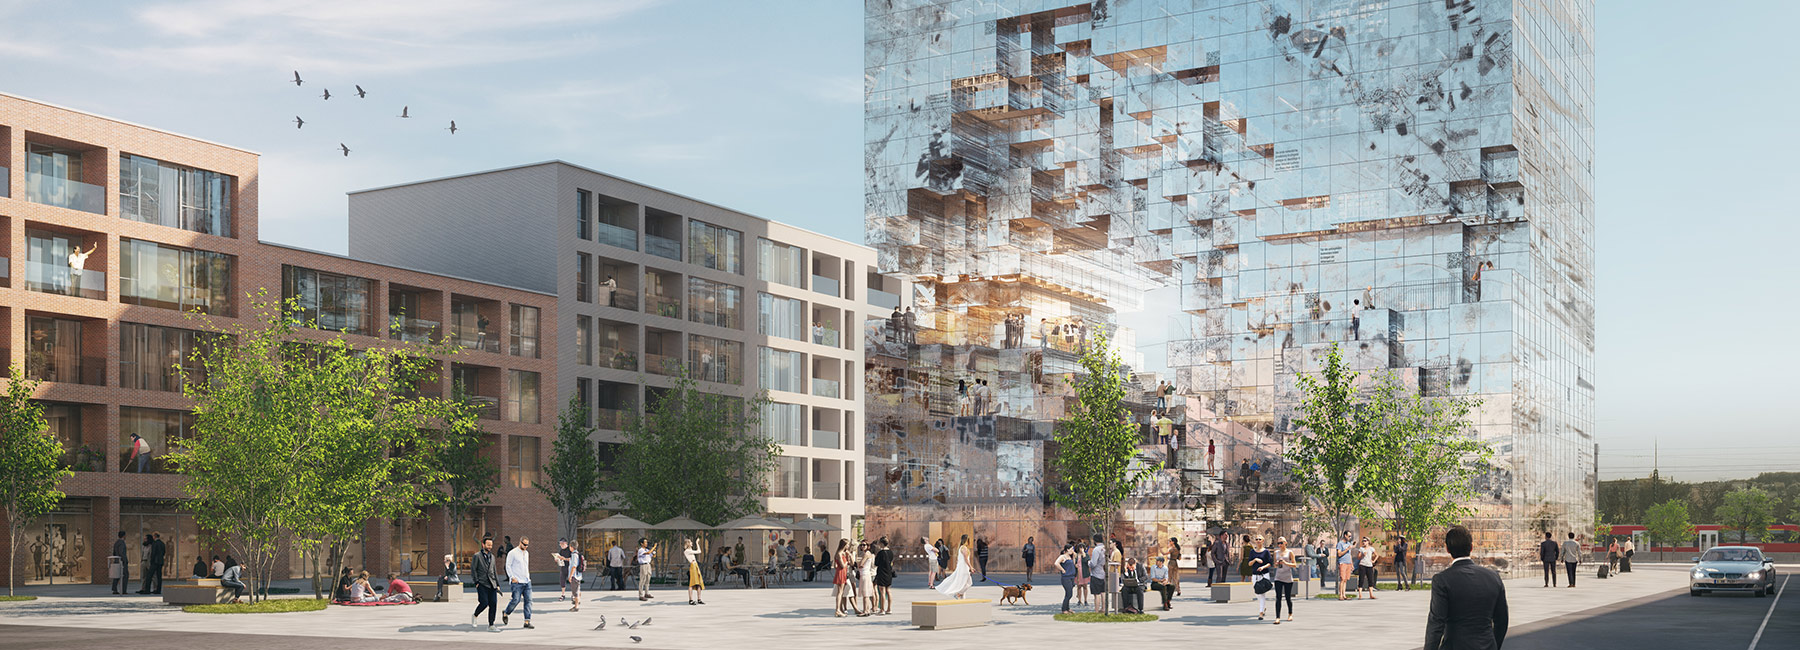 MVRDV plans office building in south germany with reflective fragmented façade